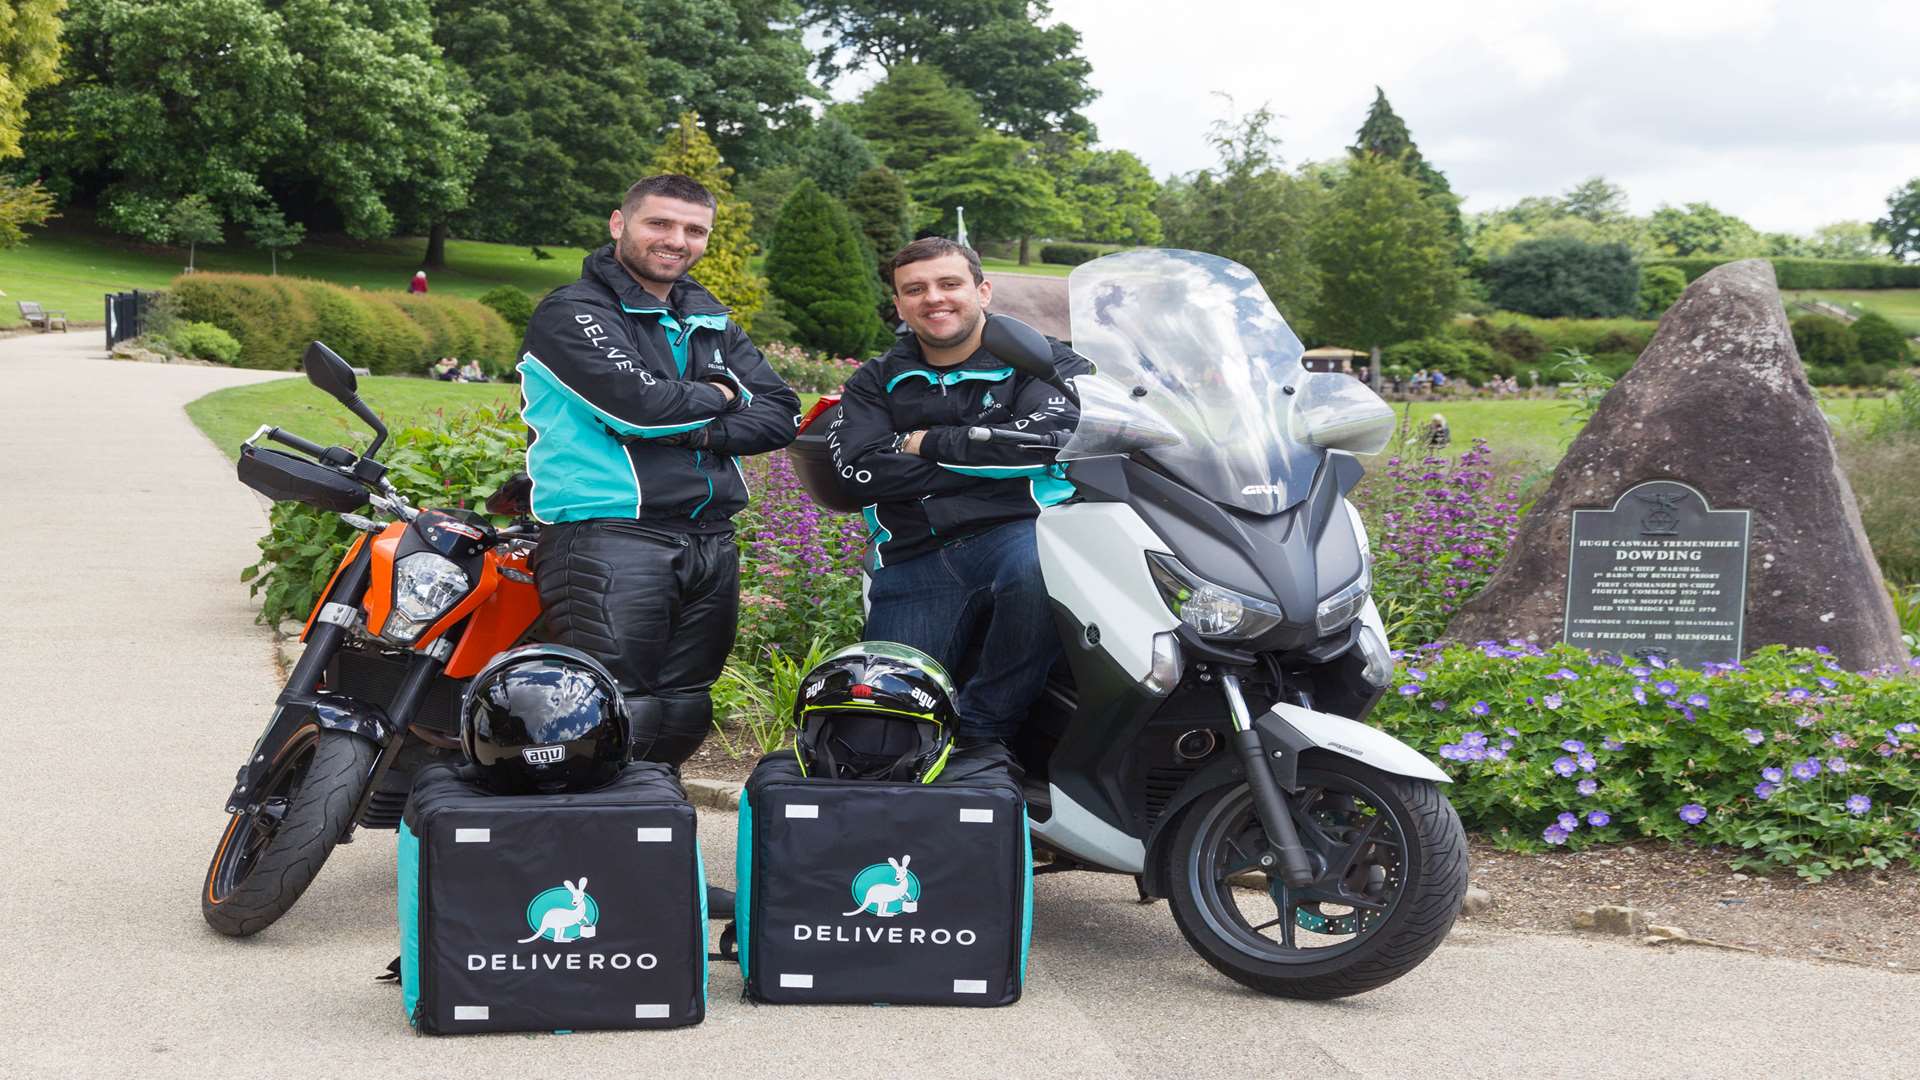 Deliveroo has no plans to introduce the trial in Kent